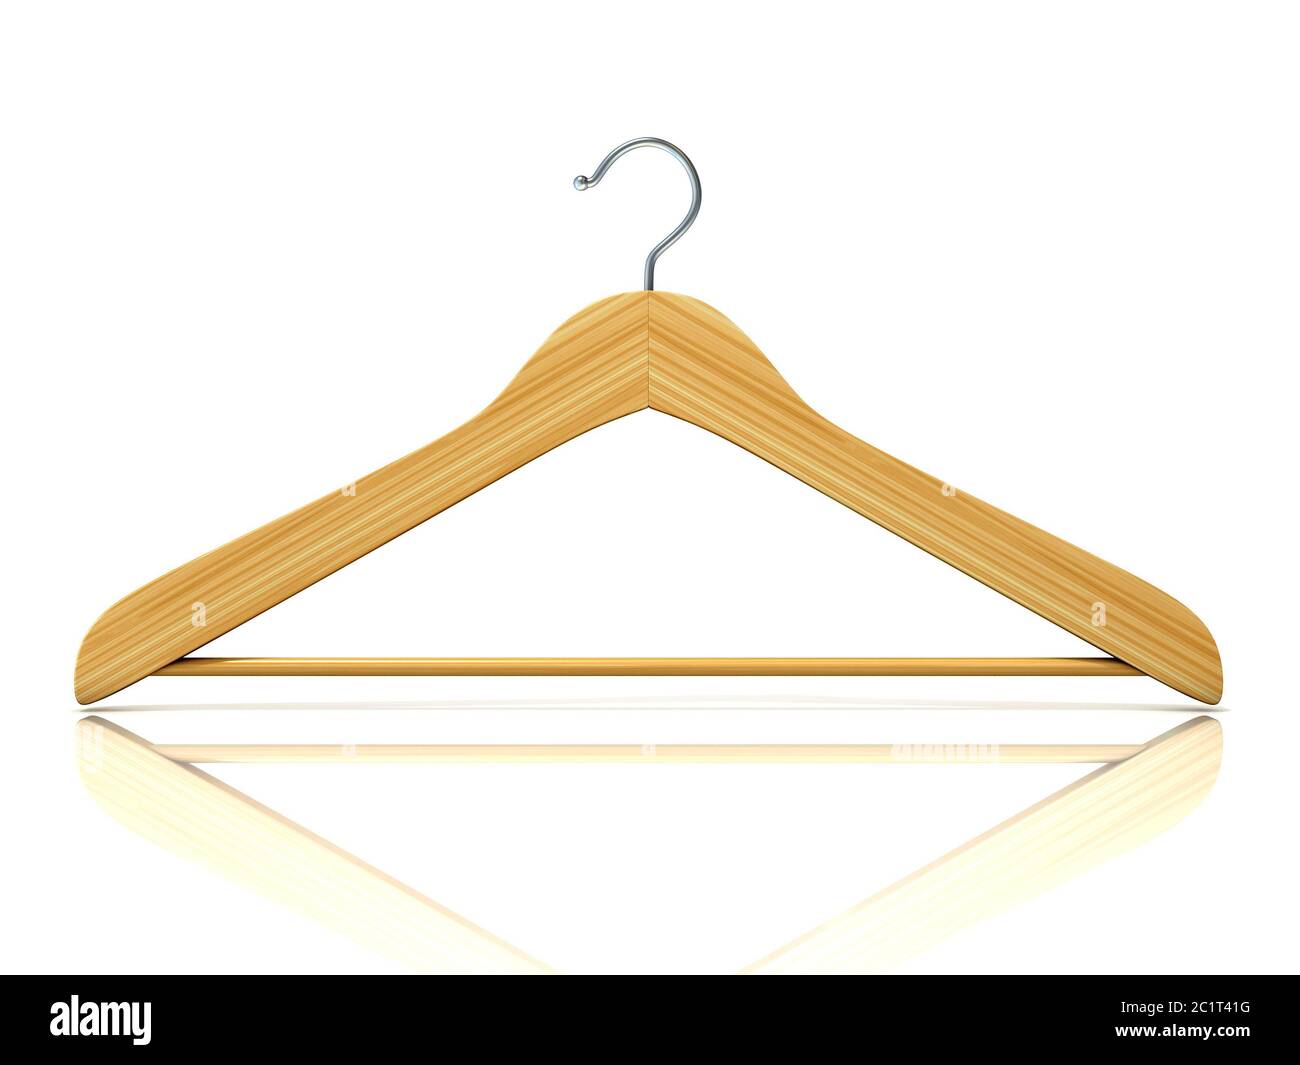 Wooden clothes hangers, 3D Stock Photo